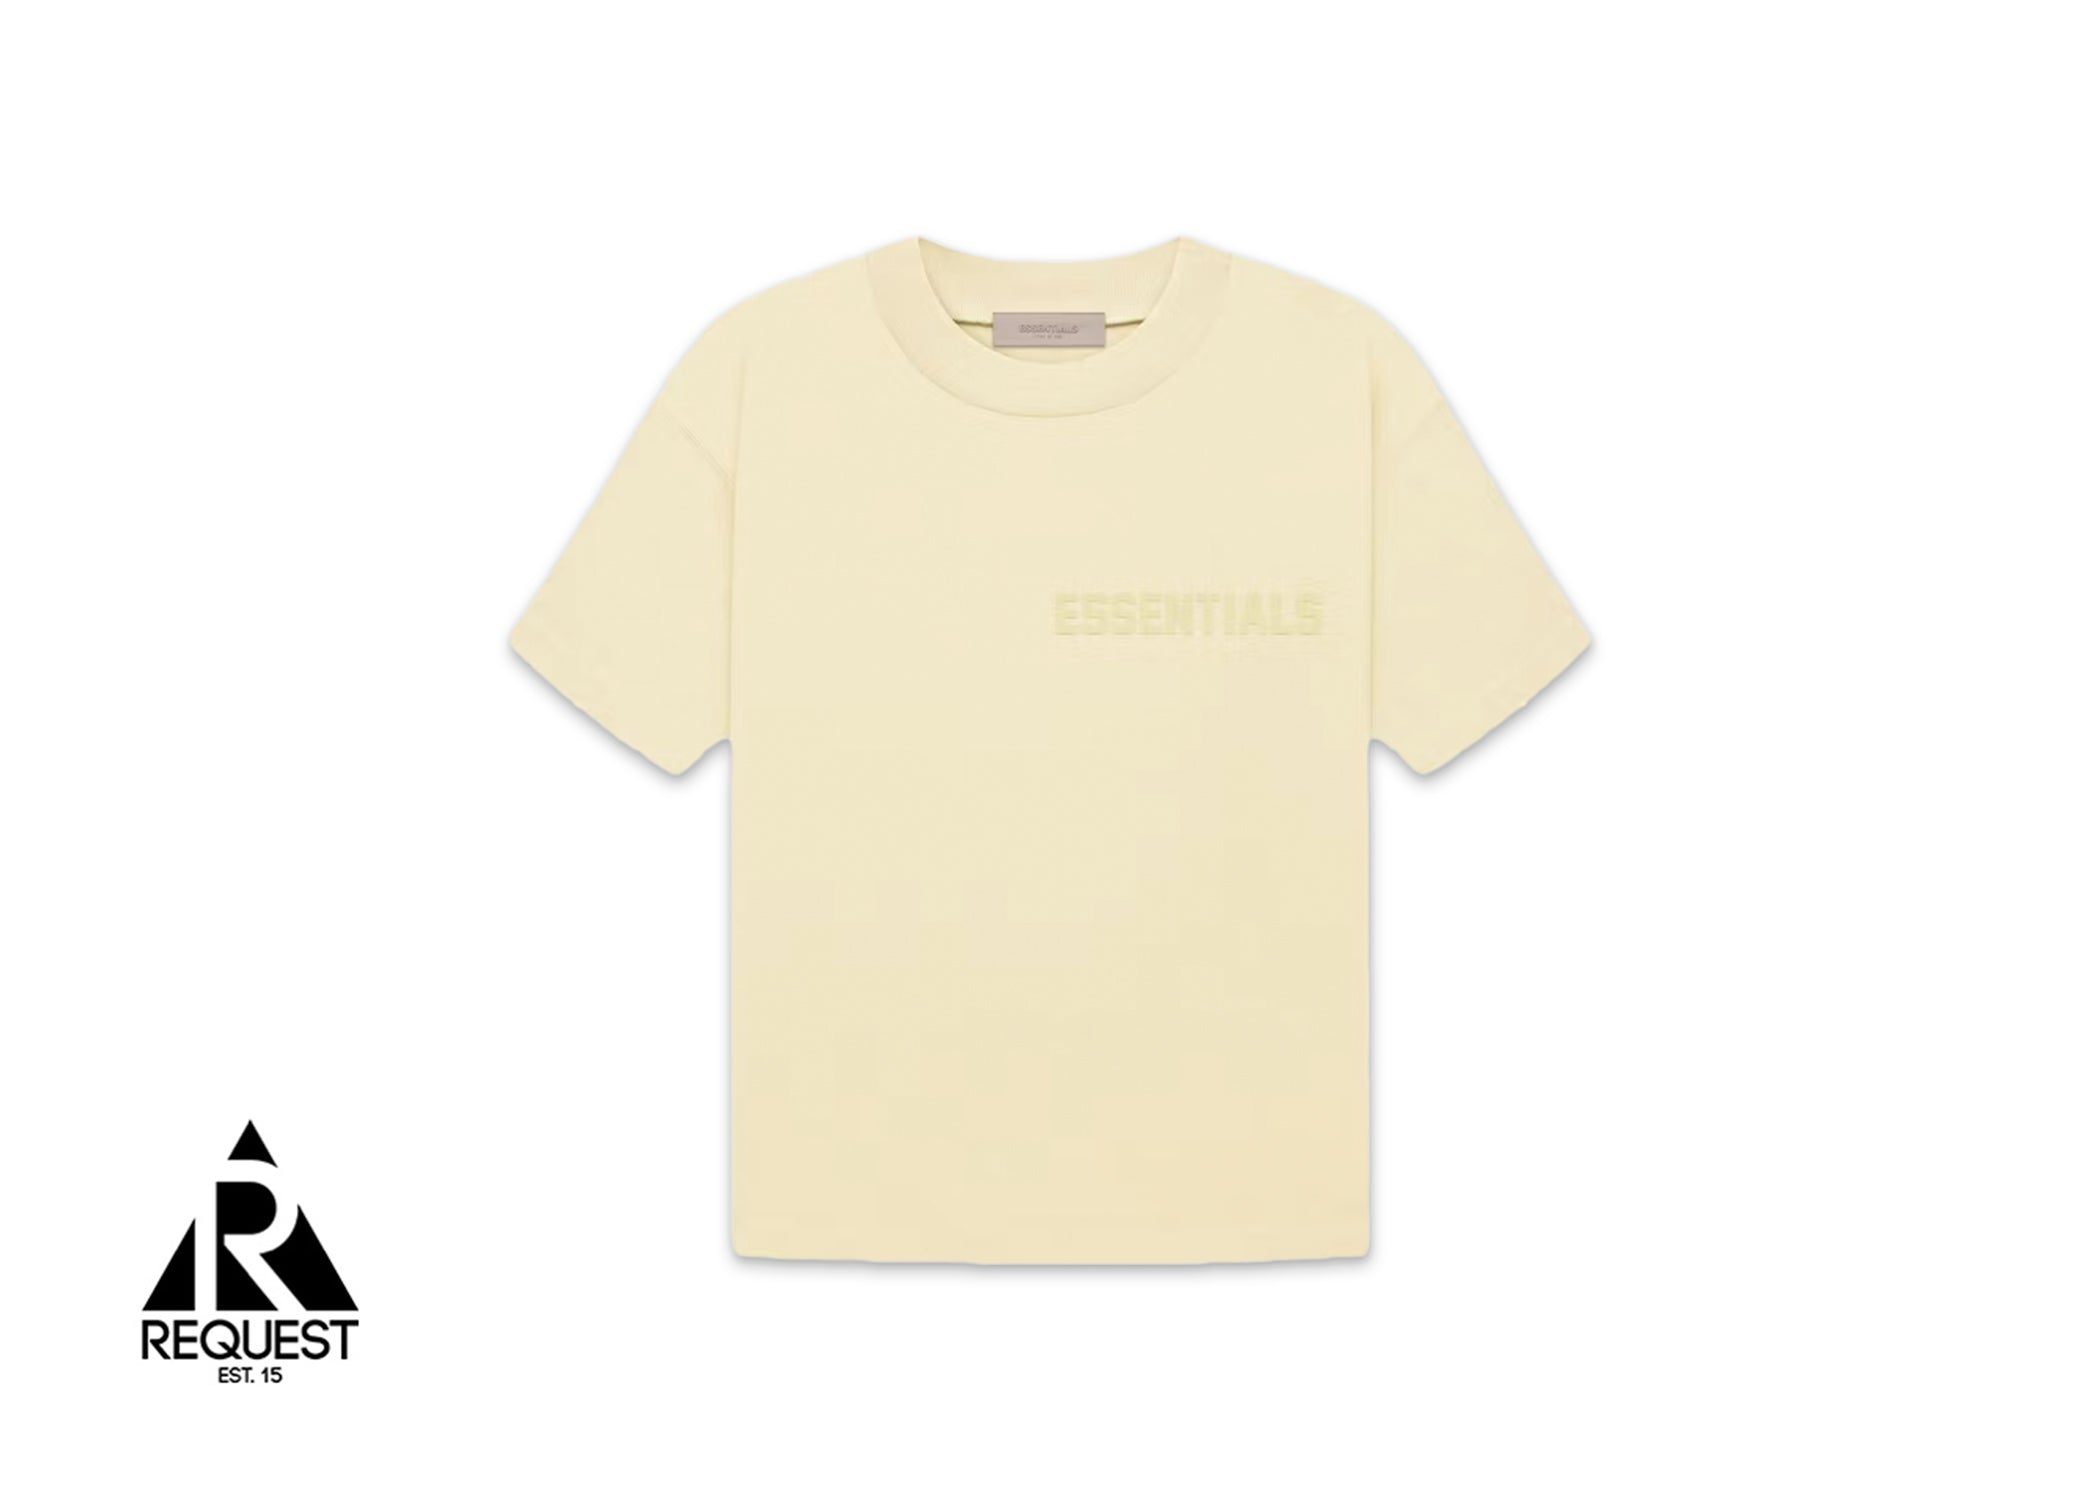 Fear of God Essentials Tee “Canary”